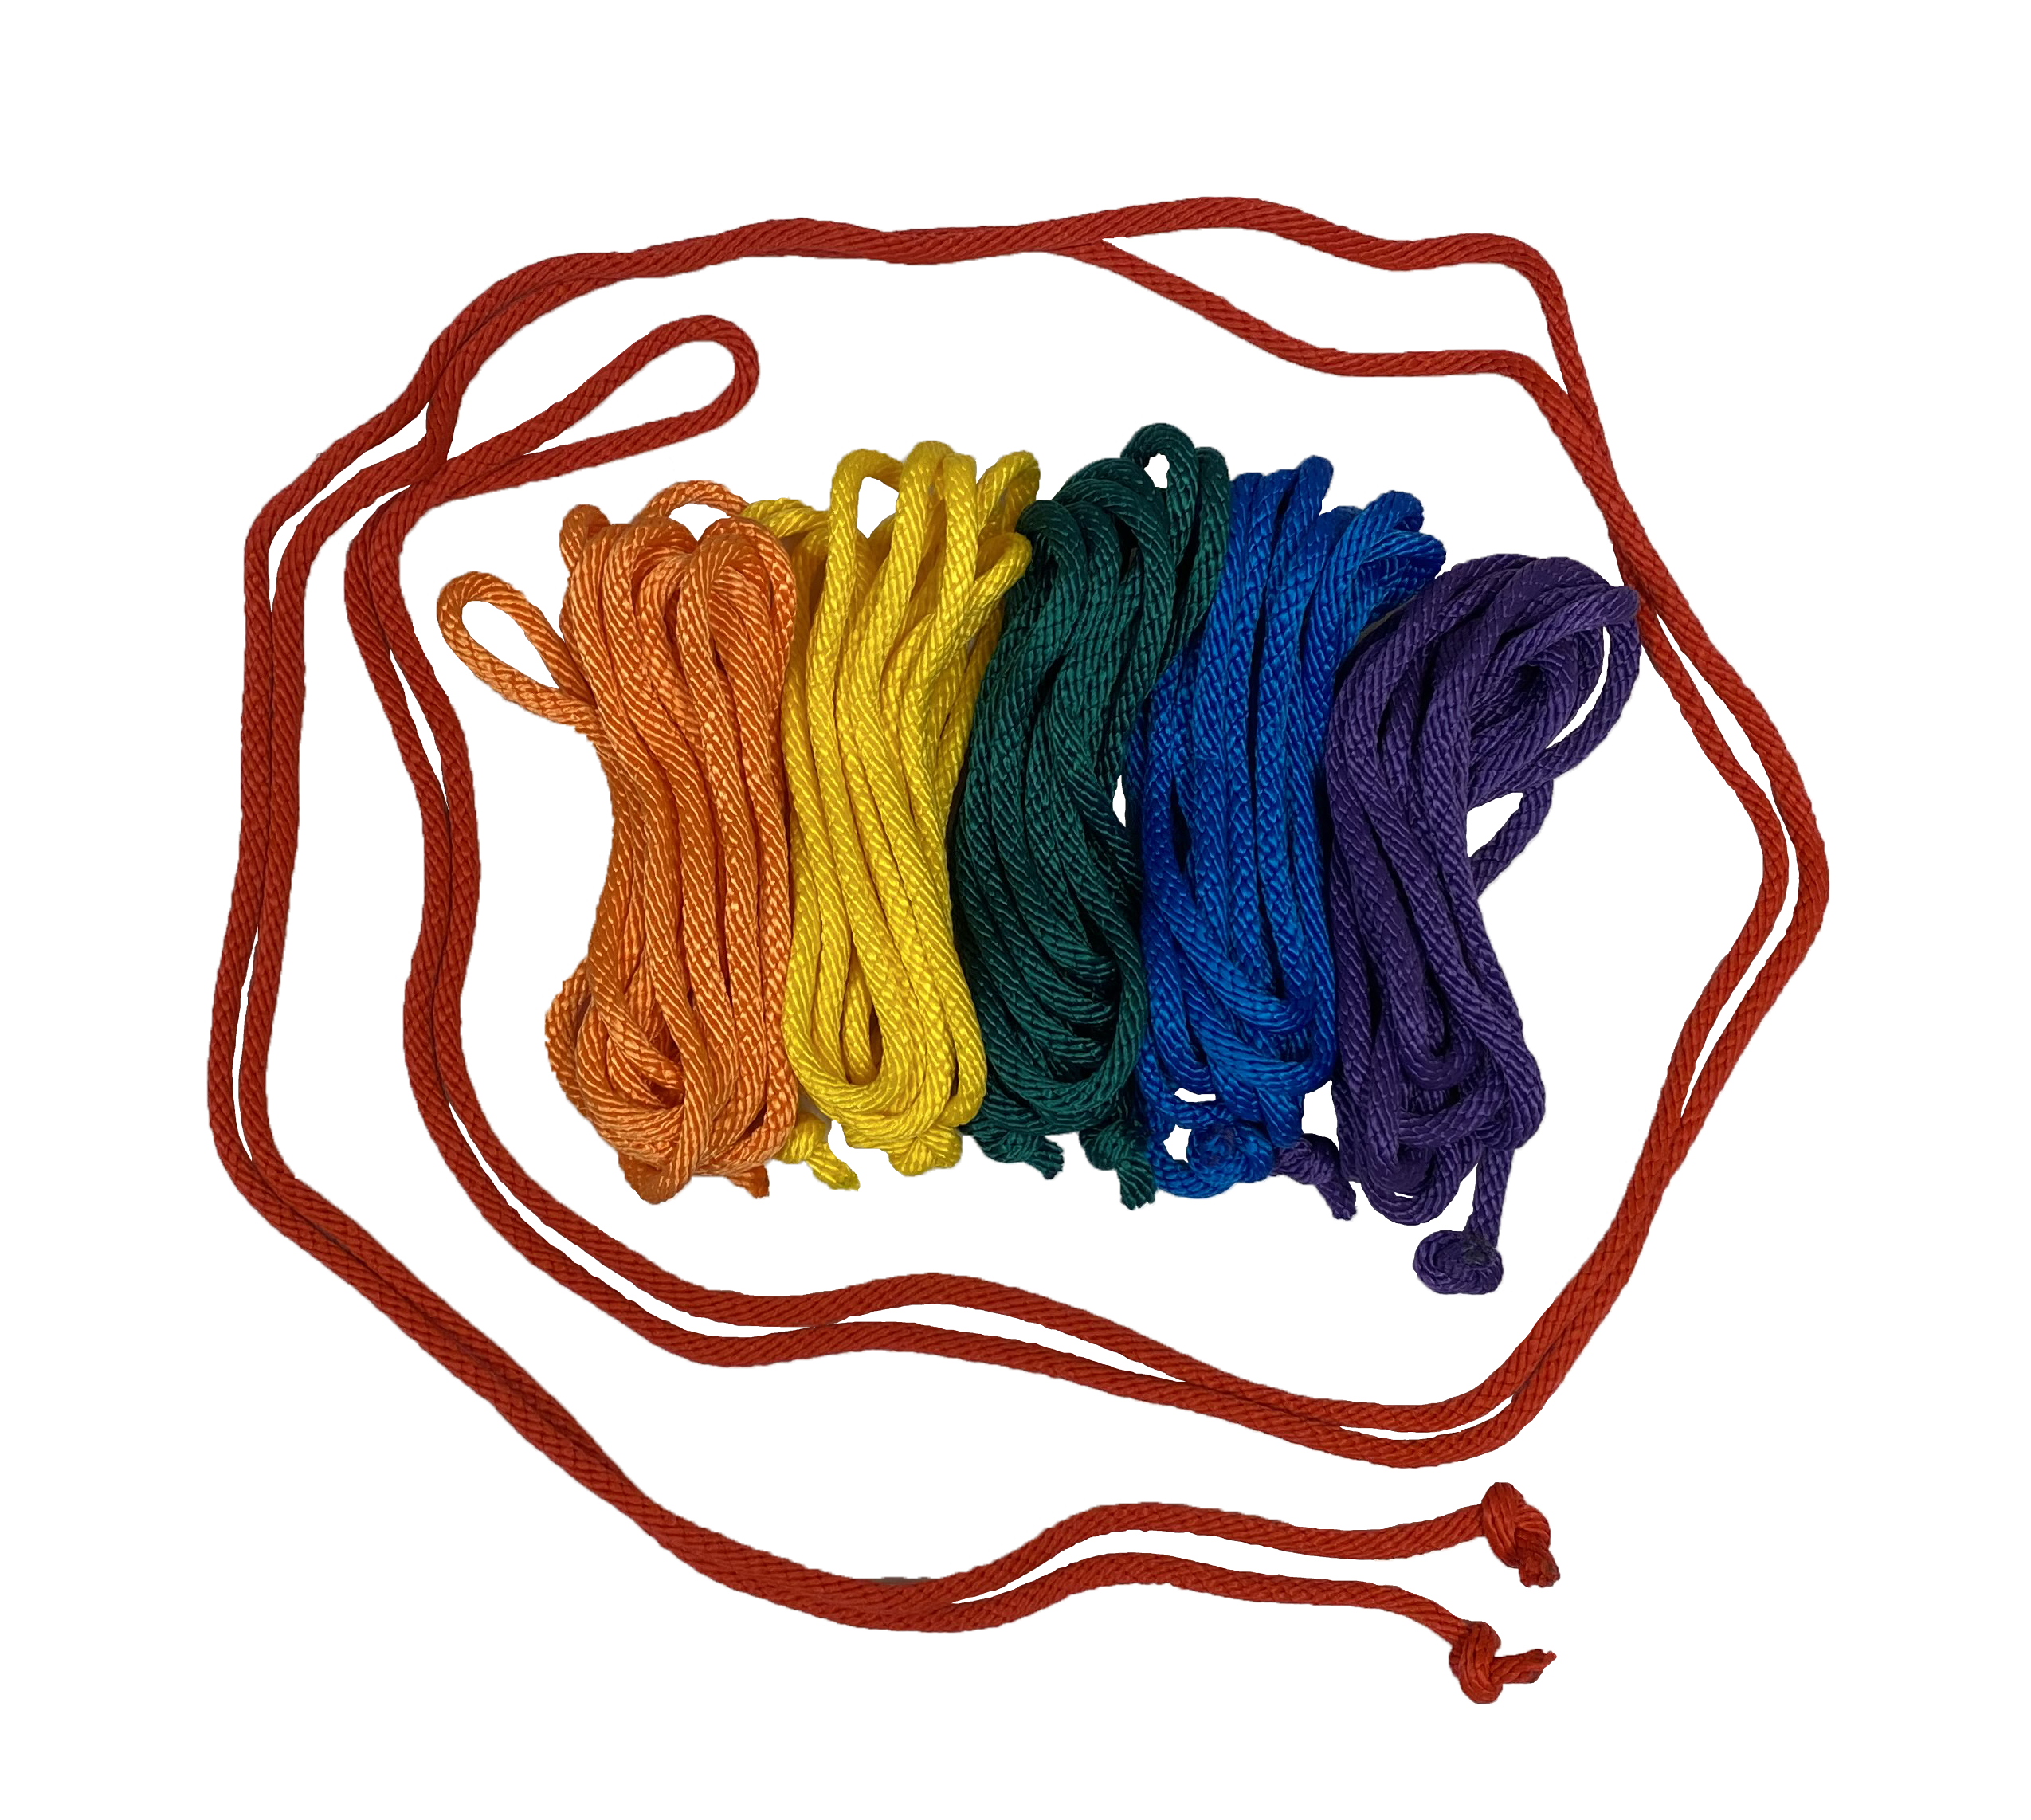 Picture of Everrich EVA-0015 Durable Nylon Jump Ropes - 16 Feet - Set of 6